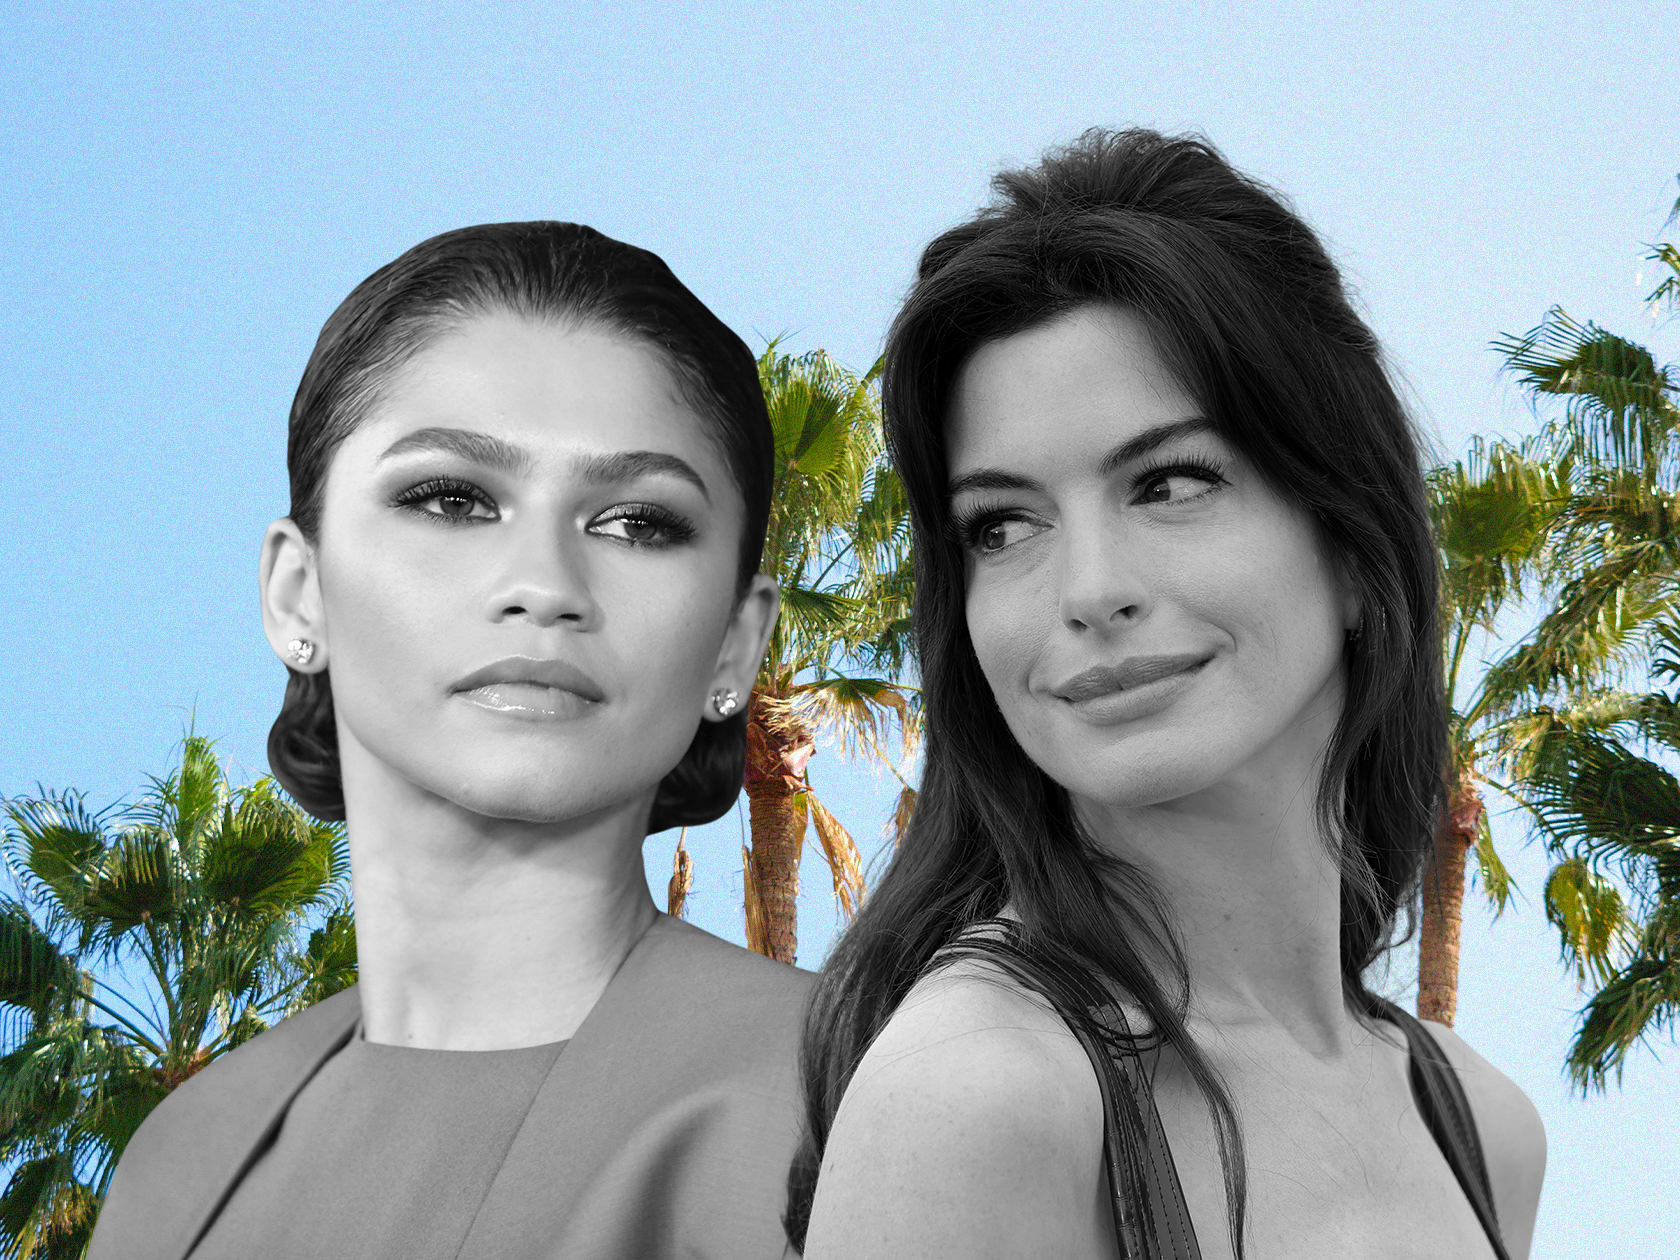 Anne Hathaway and Zendaya star in a new short film – and fans can't get  enough of it